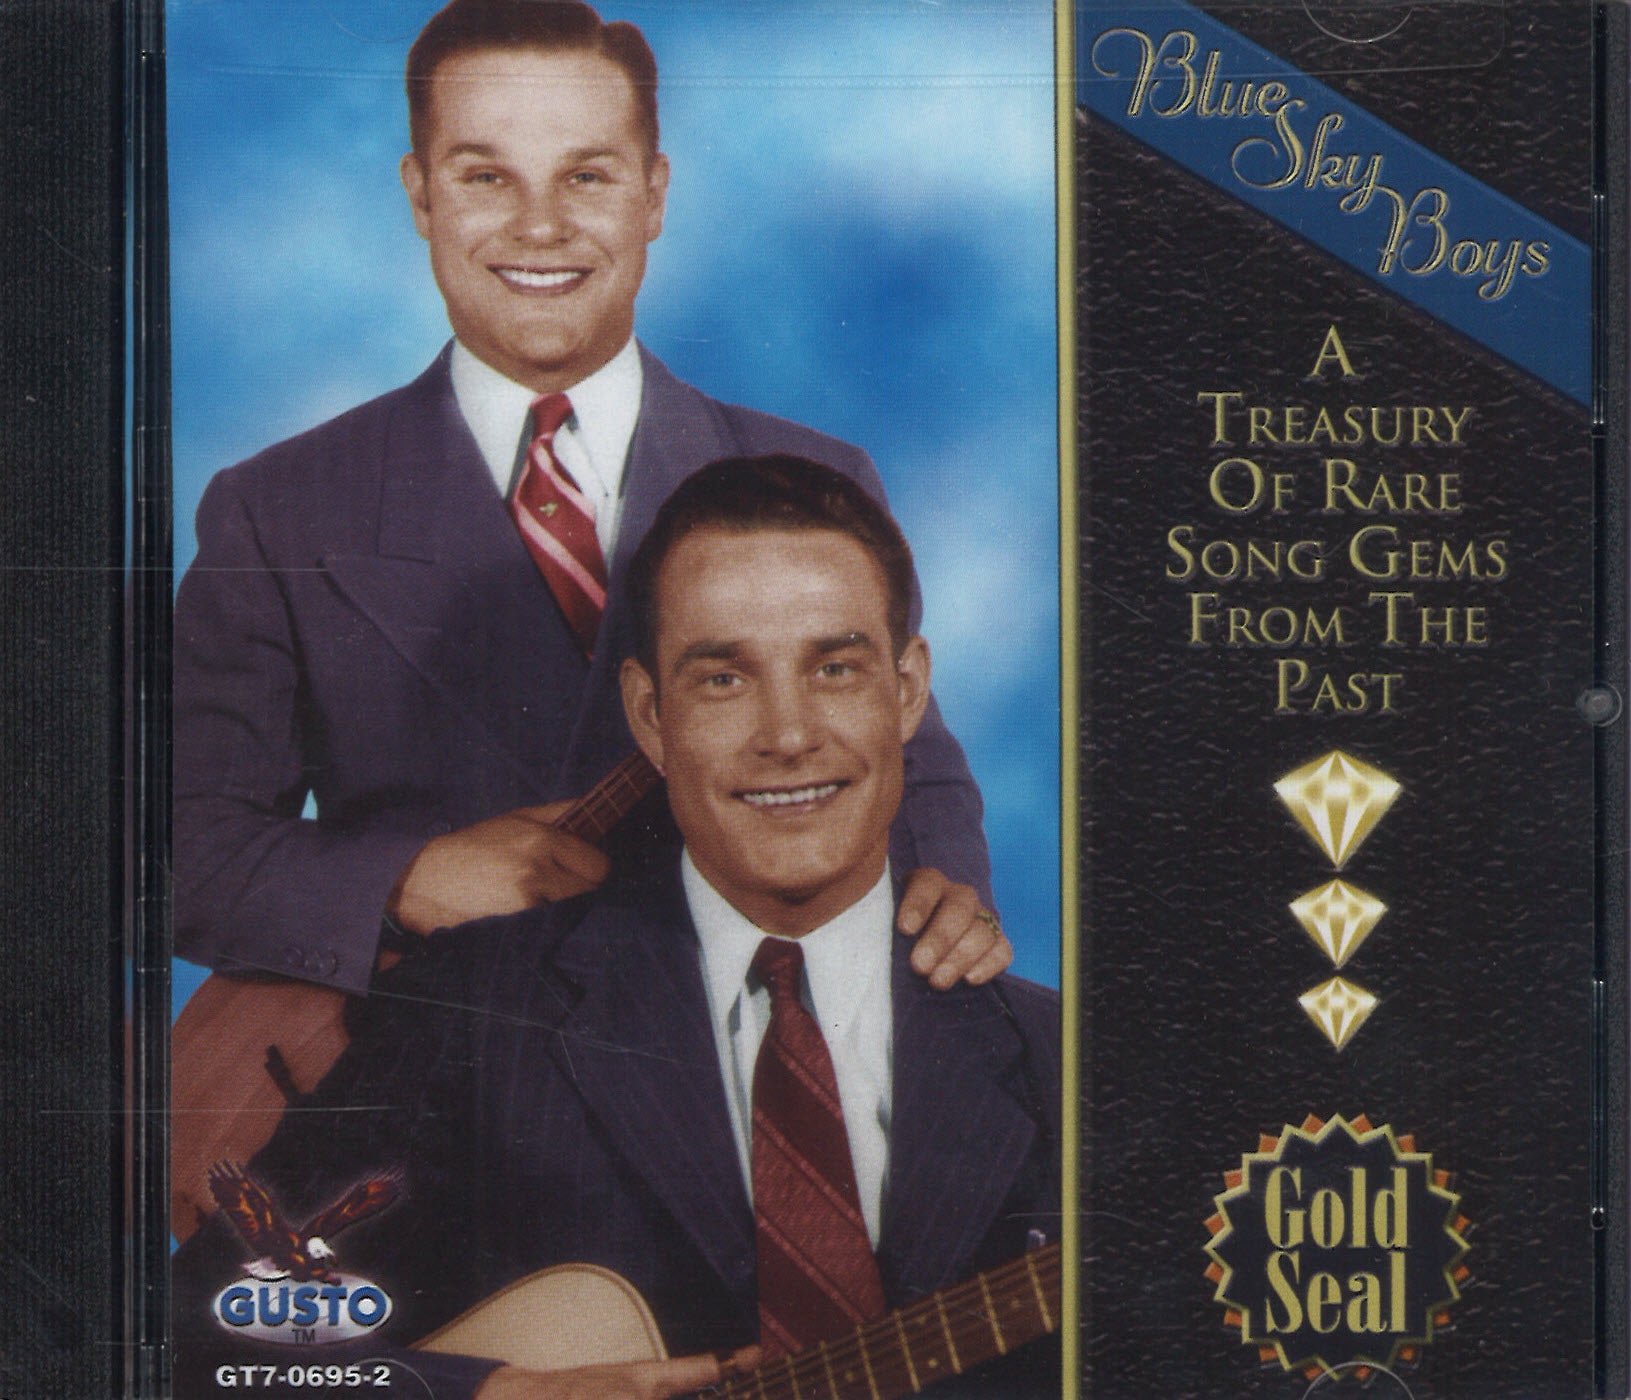 Blue Sky Boys A Treasury Of Rare Song Gems From The Past